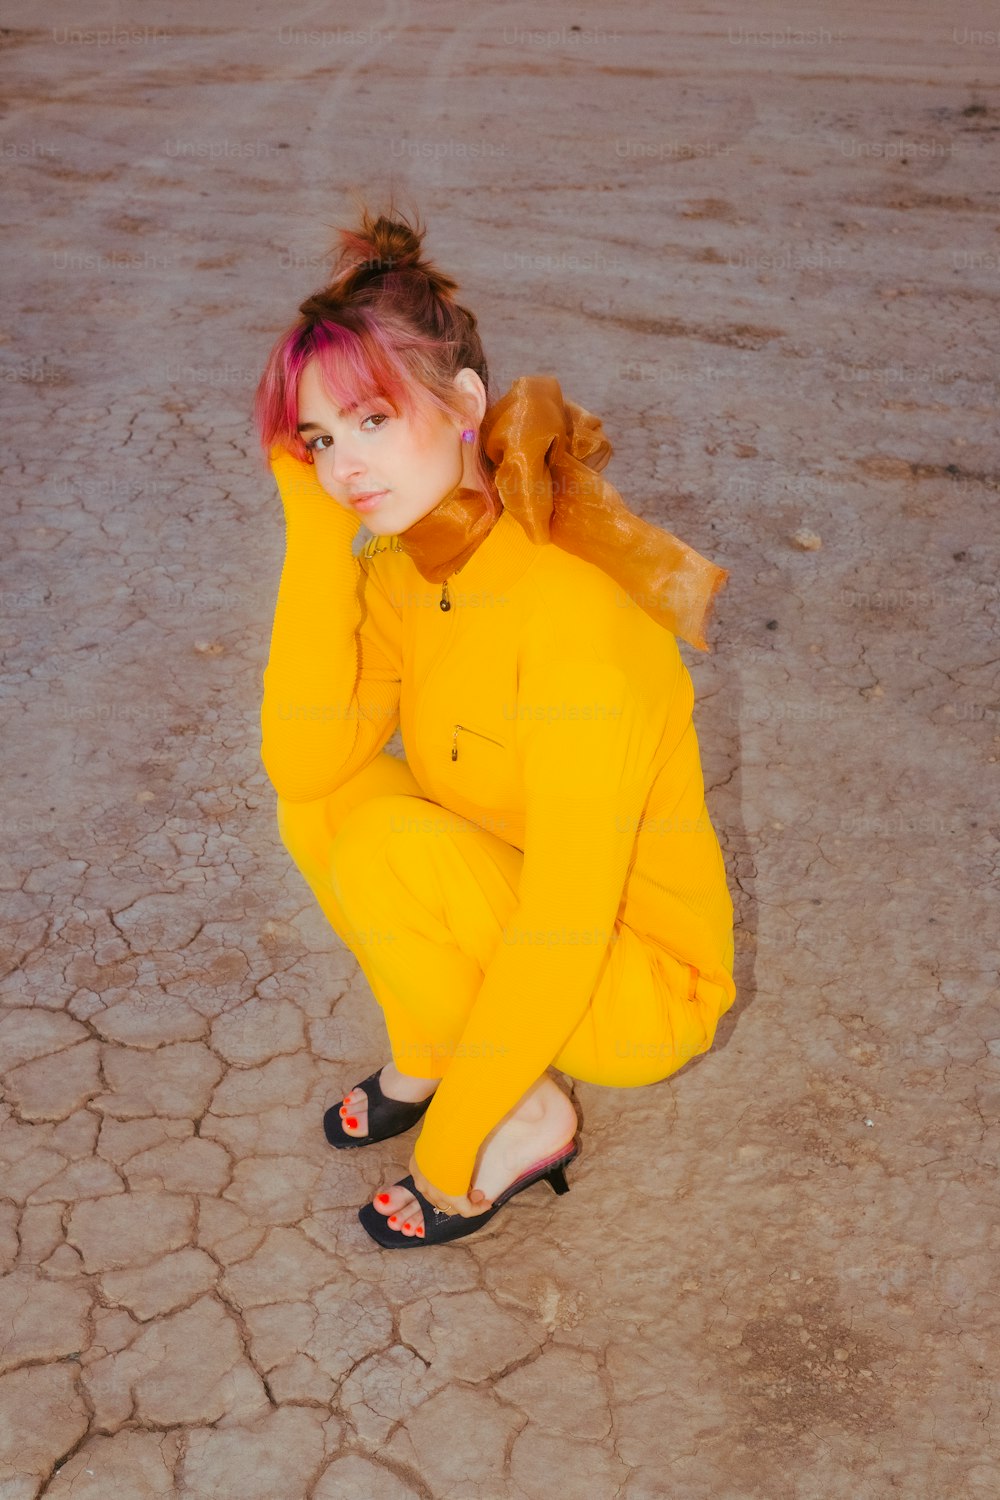 a woman with pink hair sitting on the ground